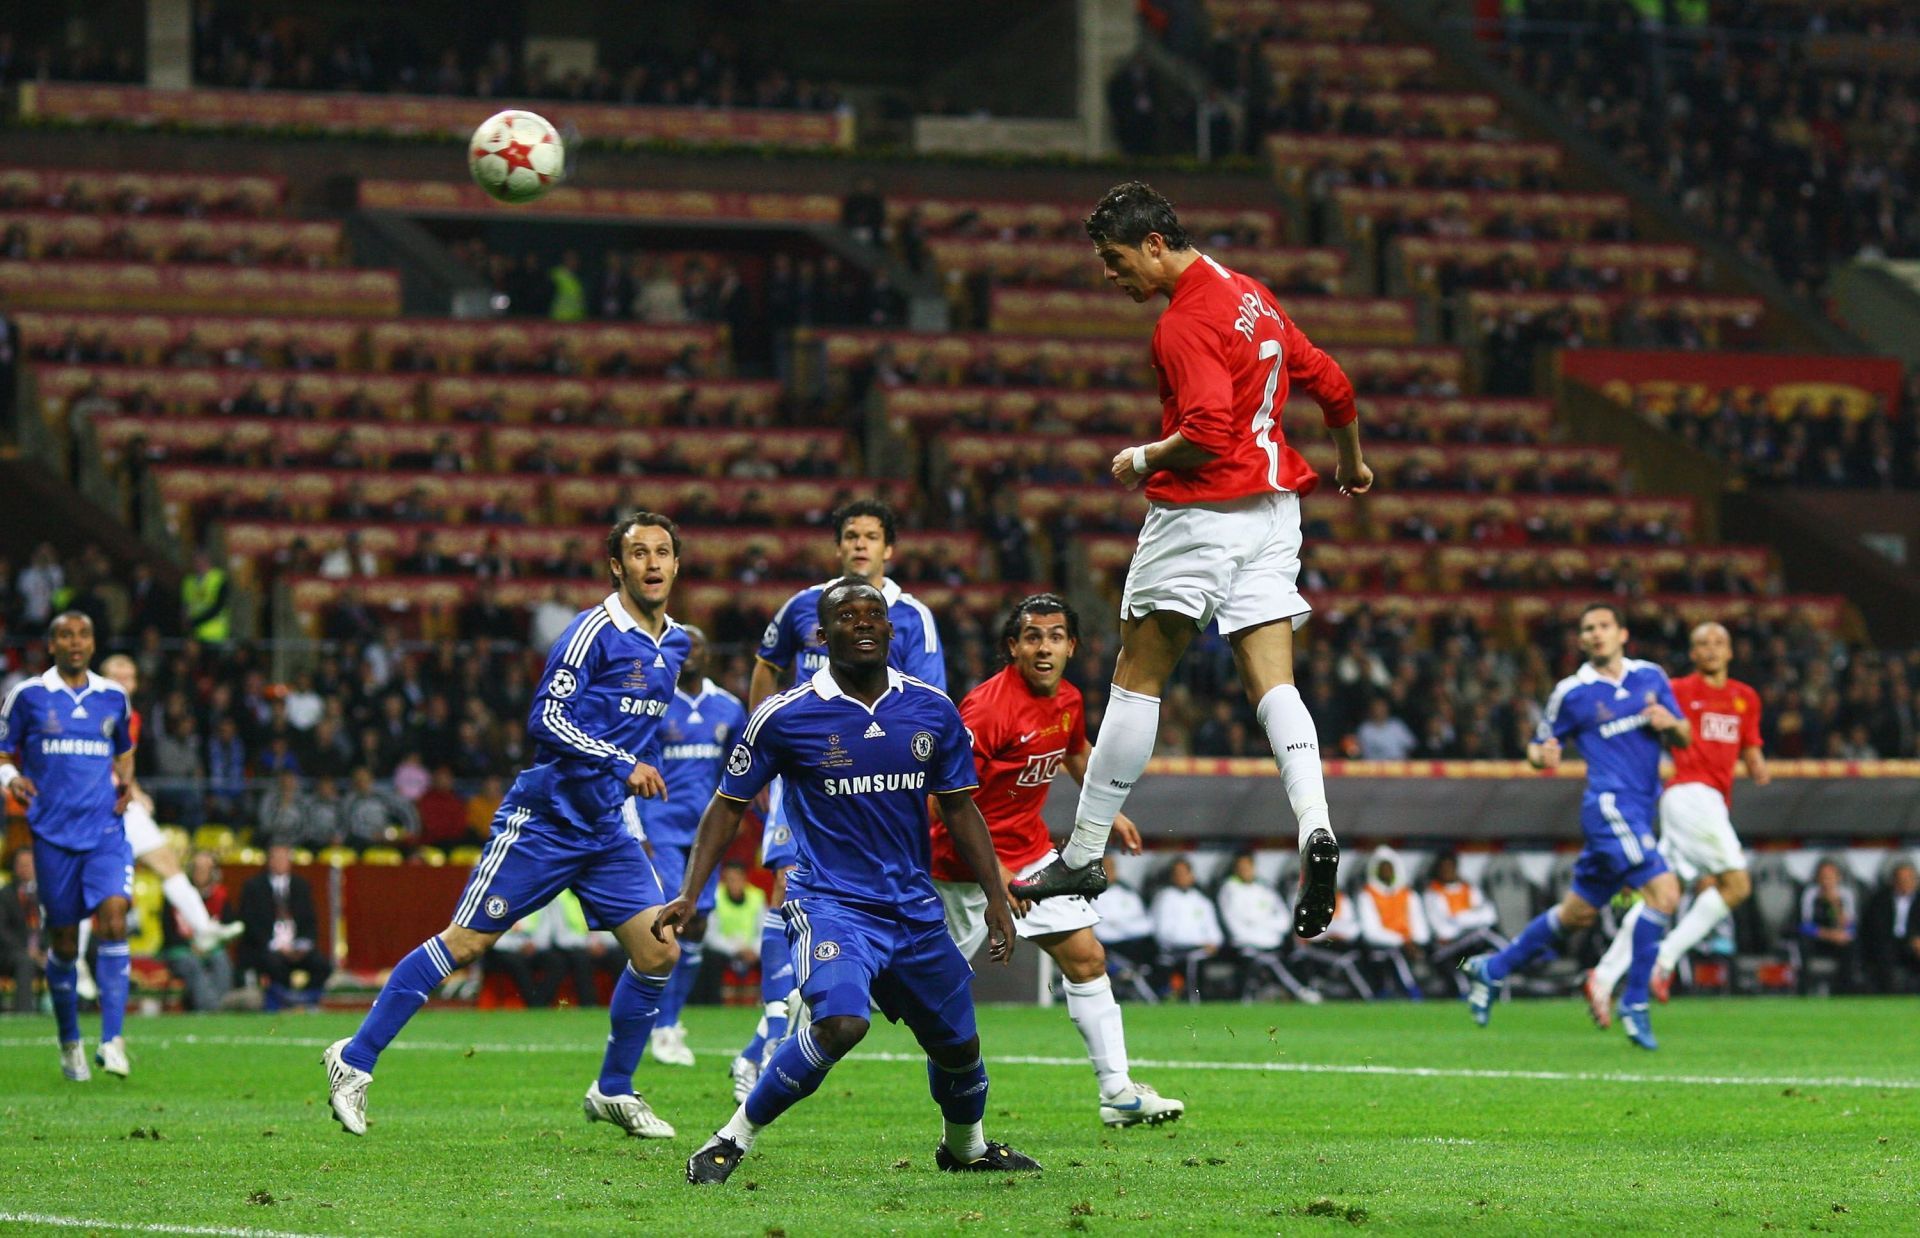 Cristiano Ronaldo scored an iconic header in the 2008 UCL final.